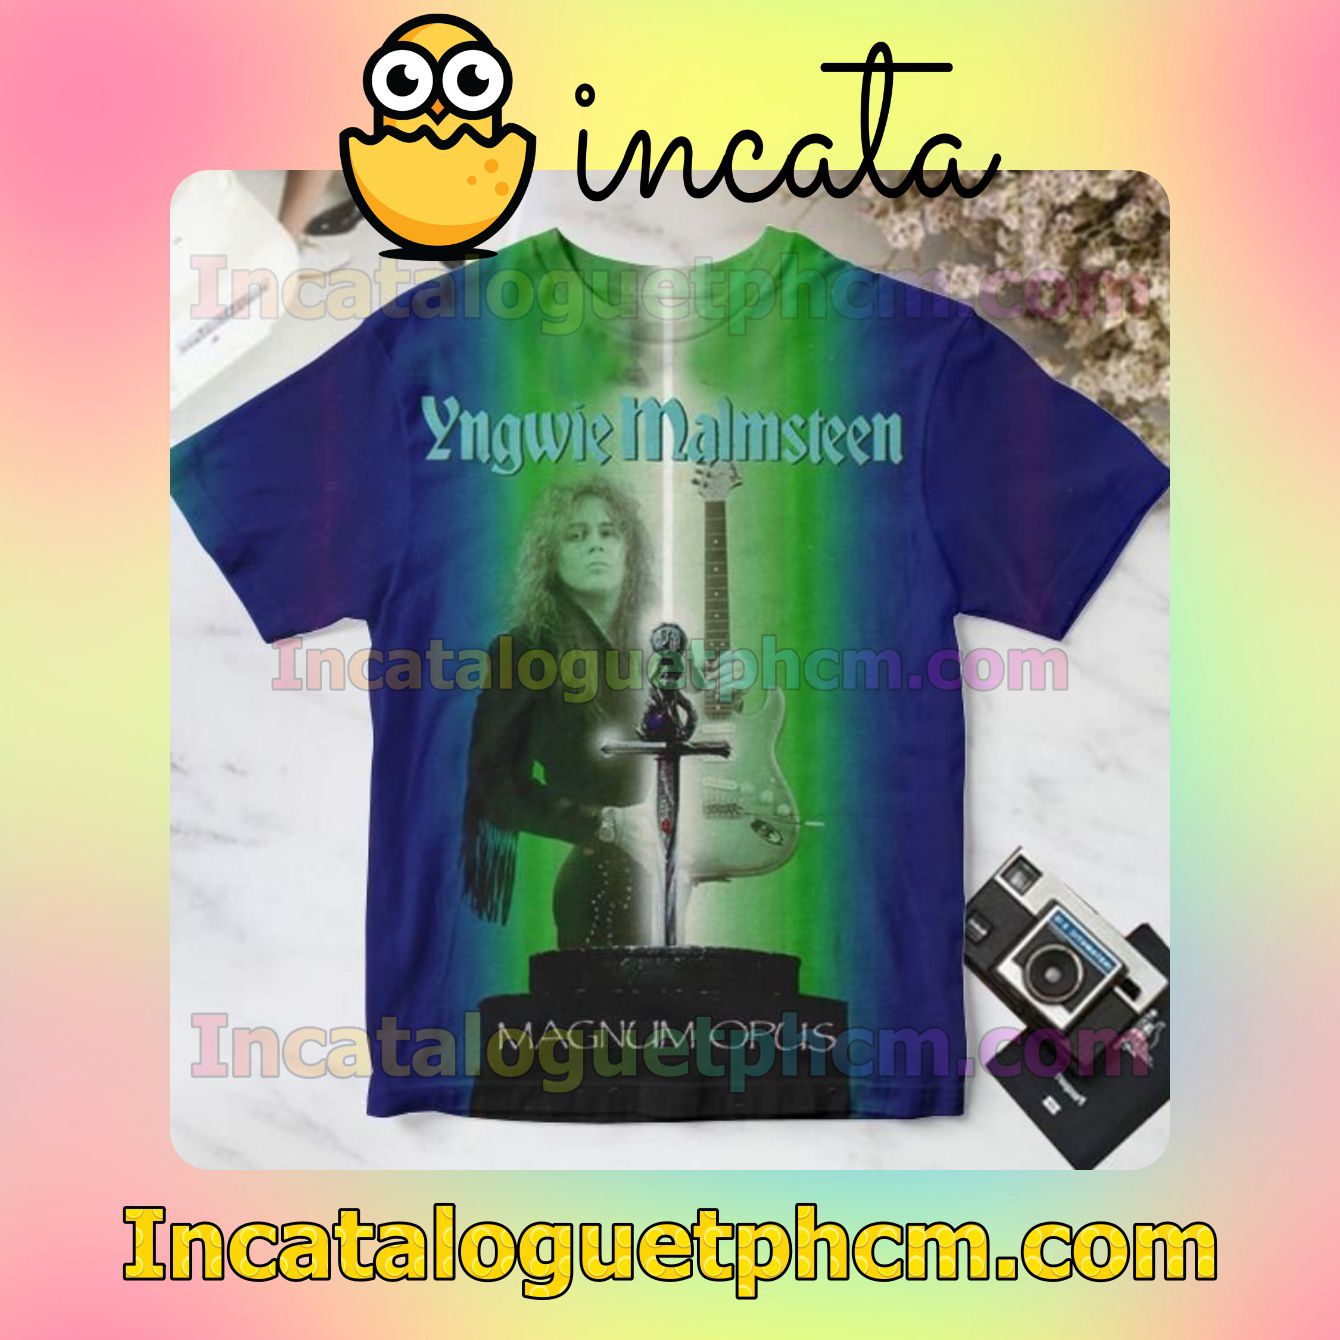 Yngwie Malmsteen Magnum Opus Album Cover Personalized Shirt